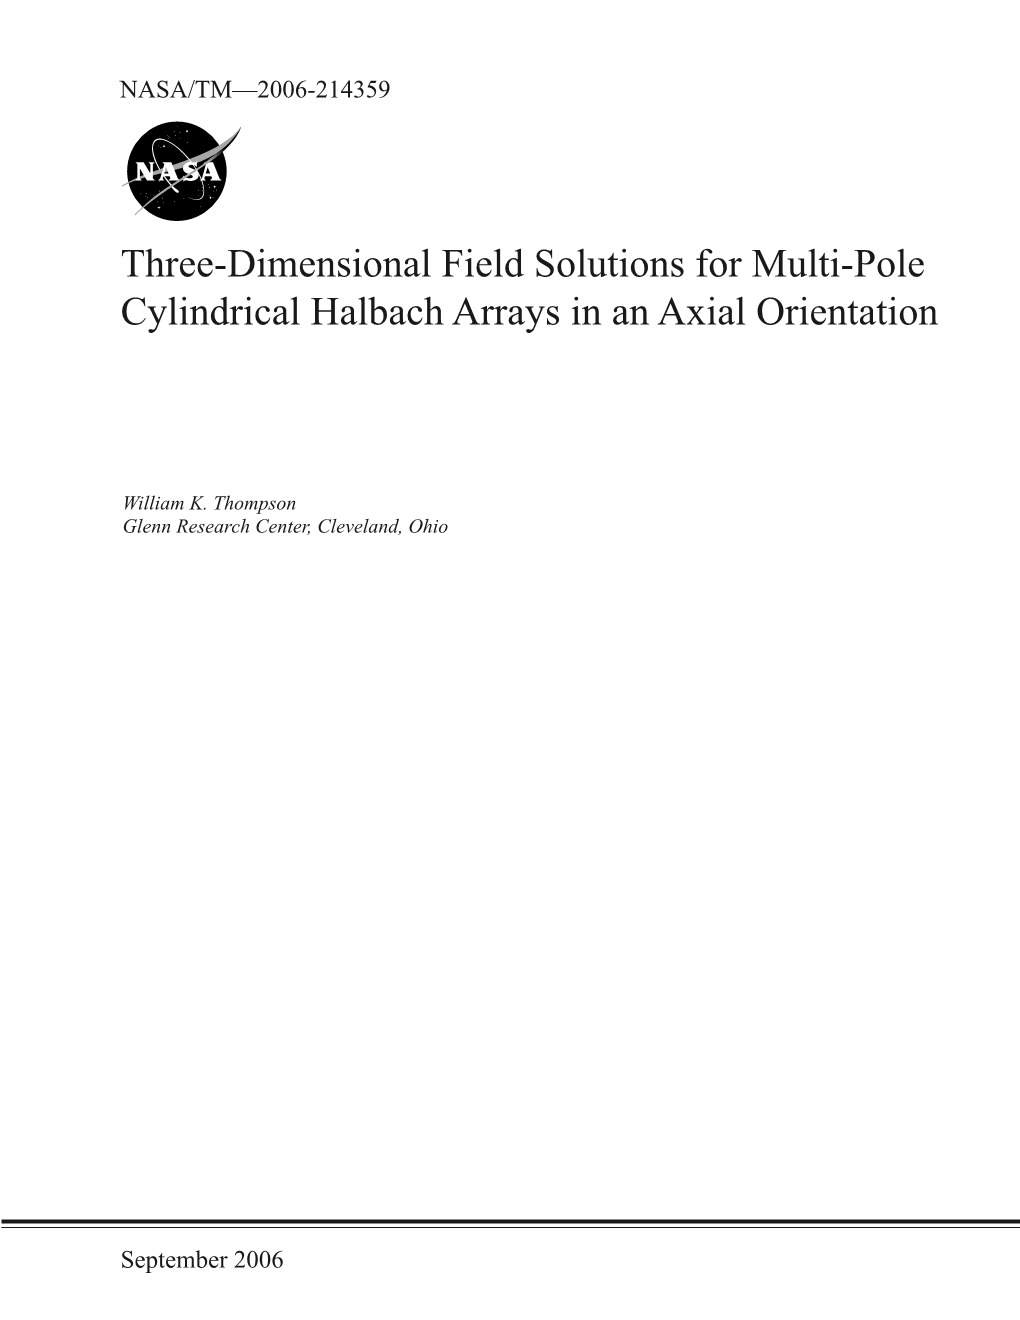 Three-Dimensional Field Solutions for Multi-Pole Cylindrical Halbach Arrays in an Axial Orientation